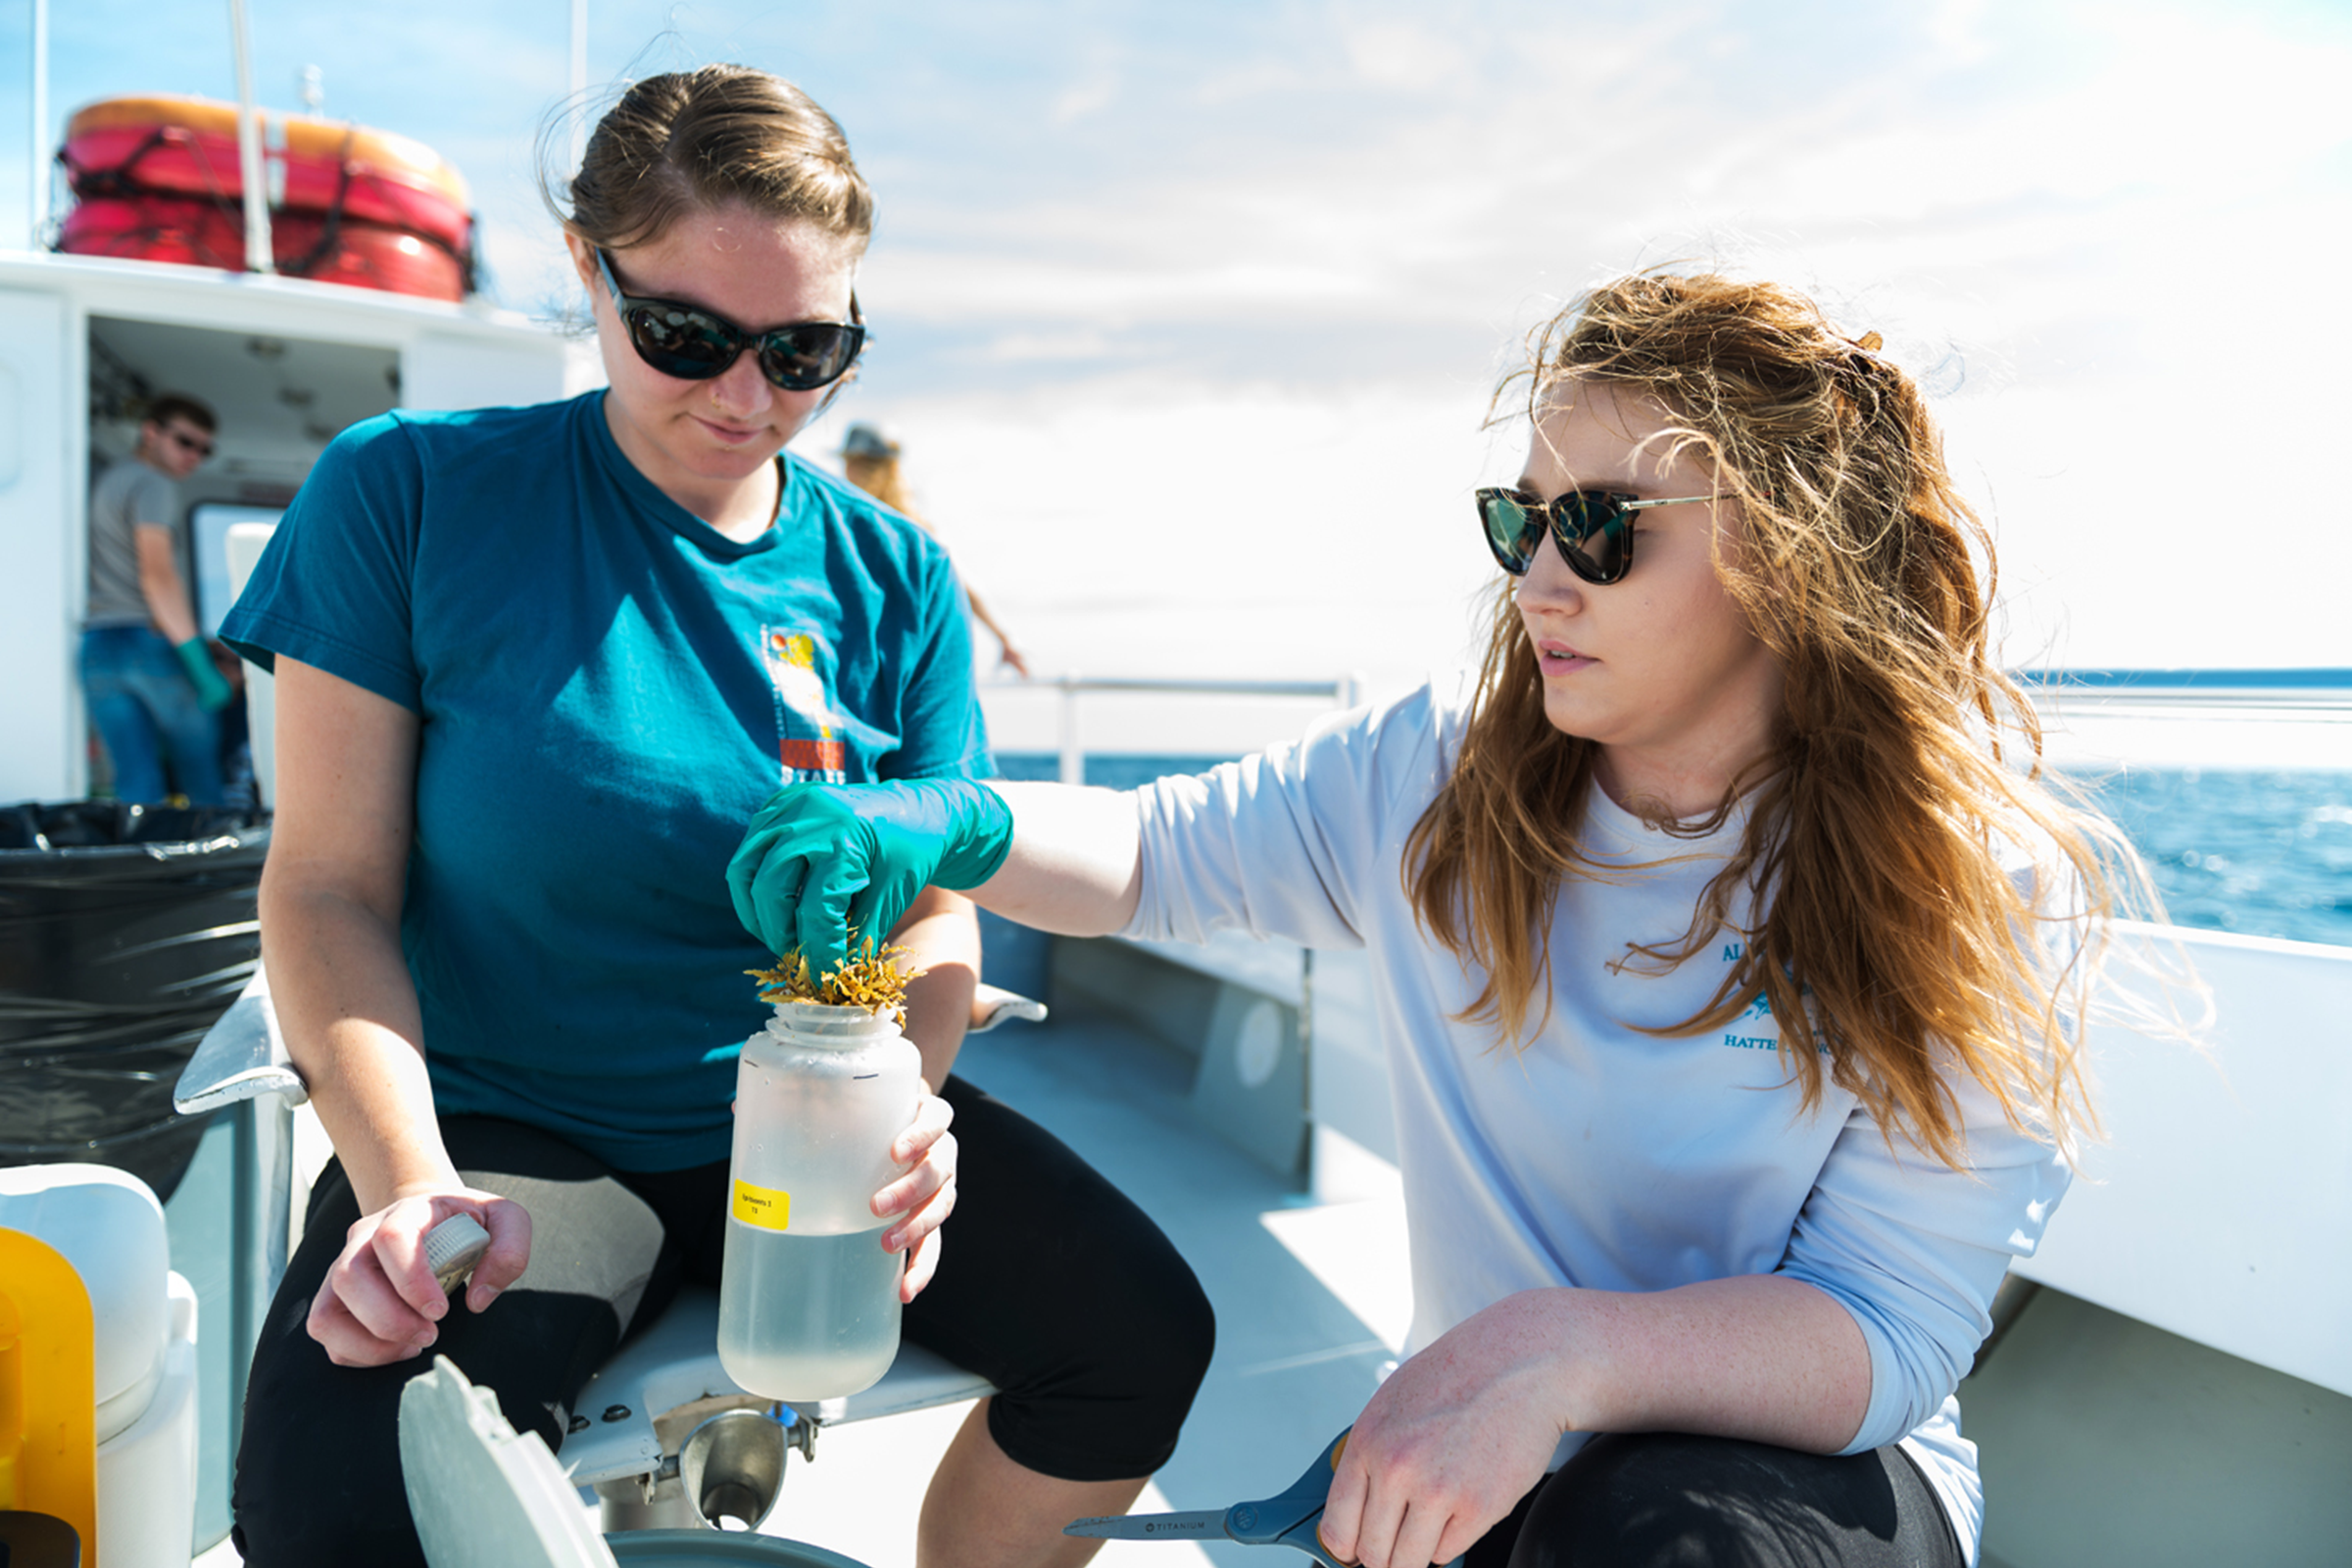 Two women on a boat in the ocean and a man in the background. One woman is placing seaweed into a container half-filled with water that is being held by another woman.